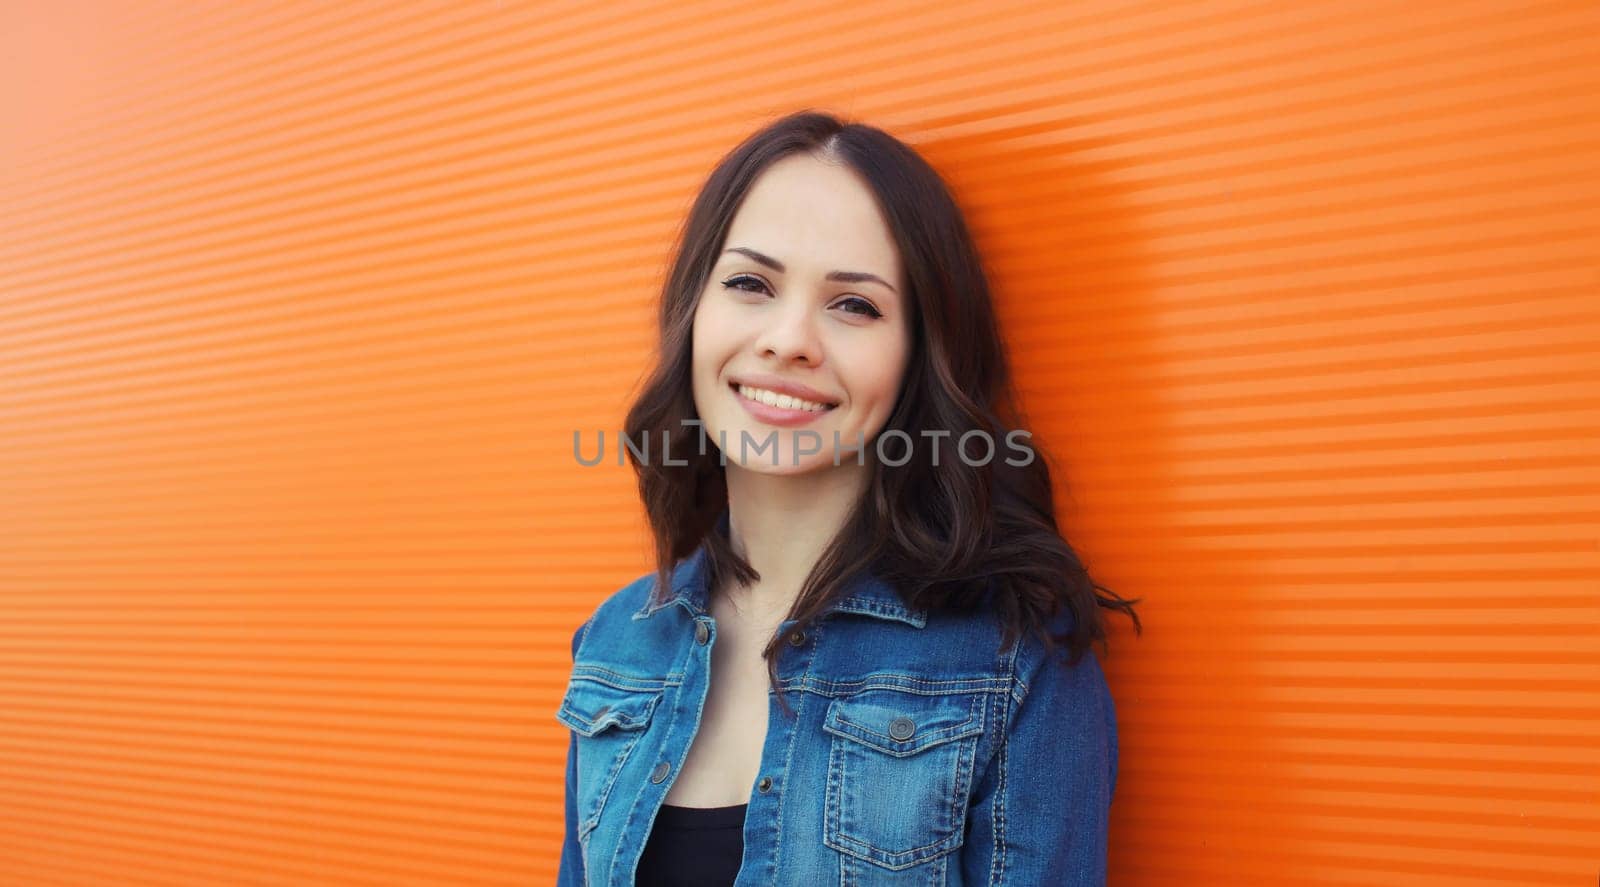 Portrait of happy smiling brunette young woman looking at camera posing on orange background